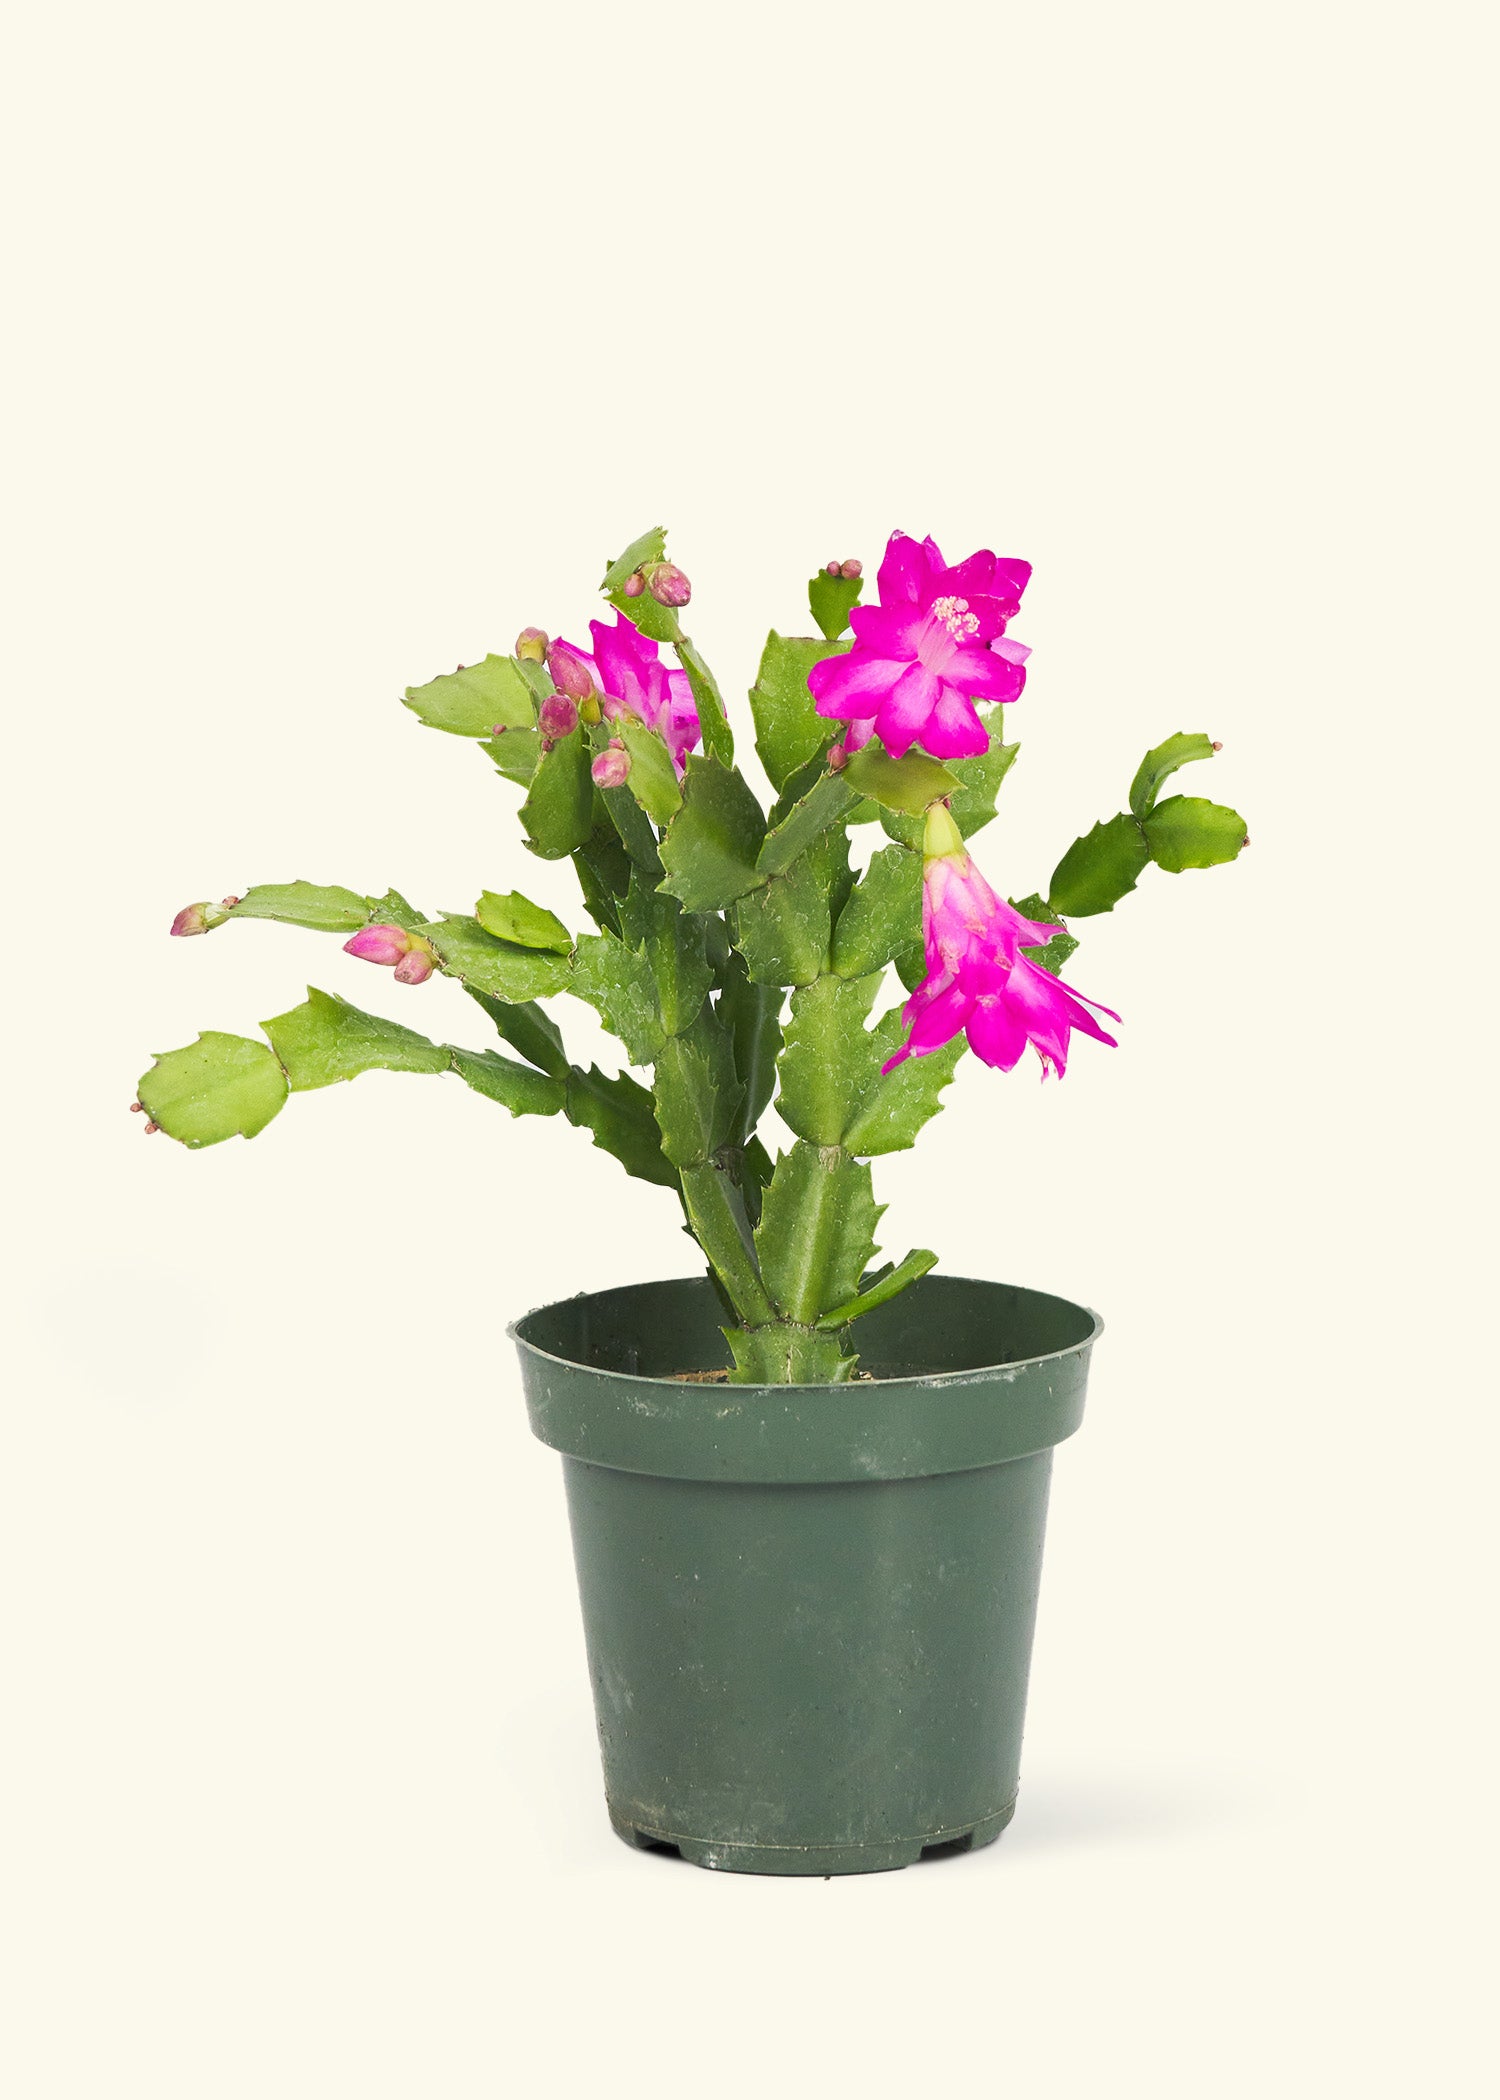 Small Pink Christmas Cactus in a grow pot.